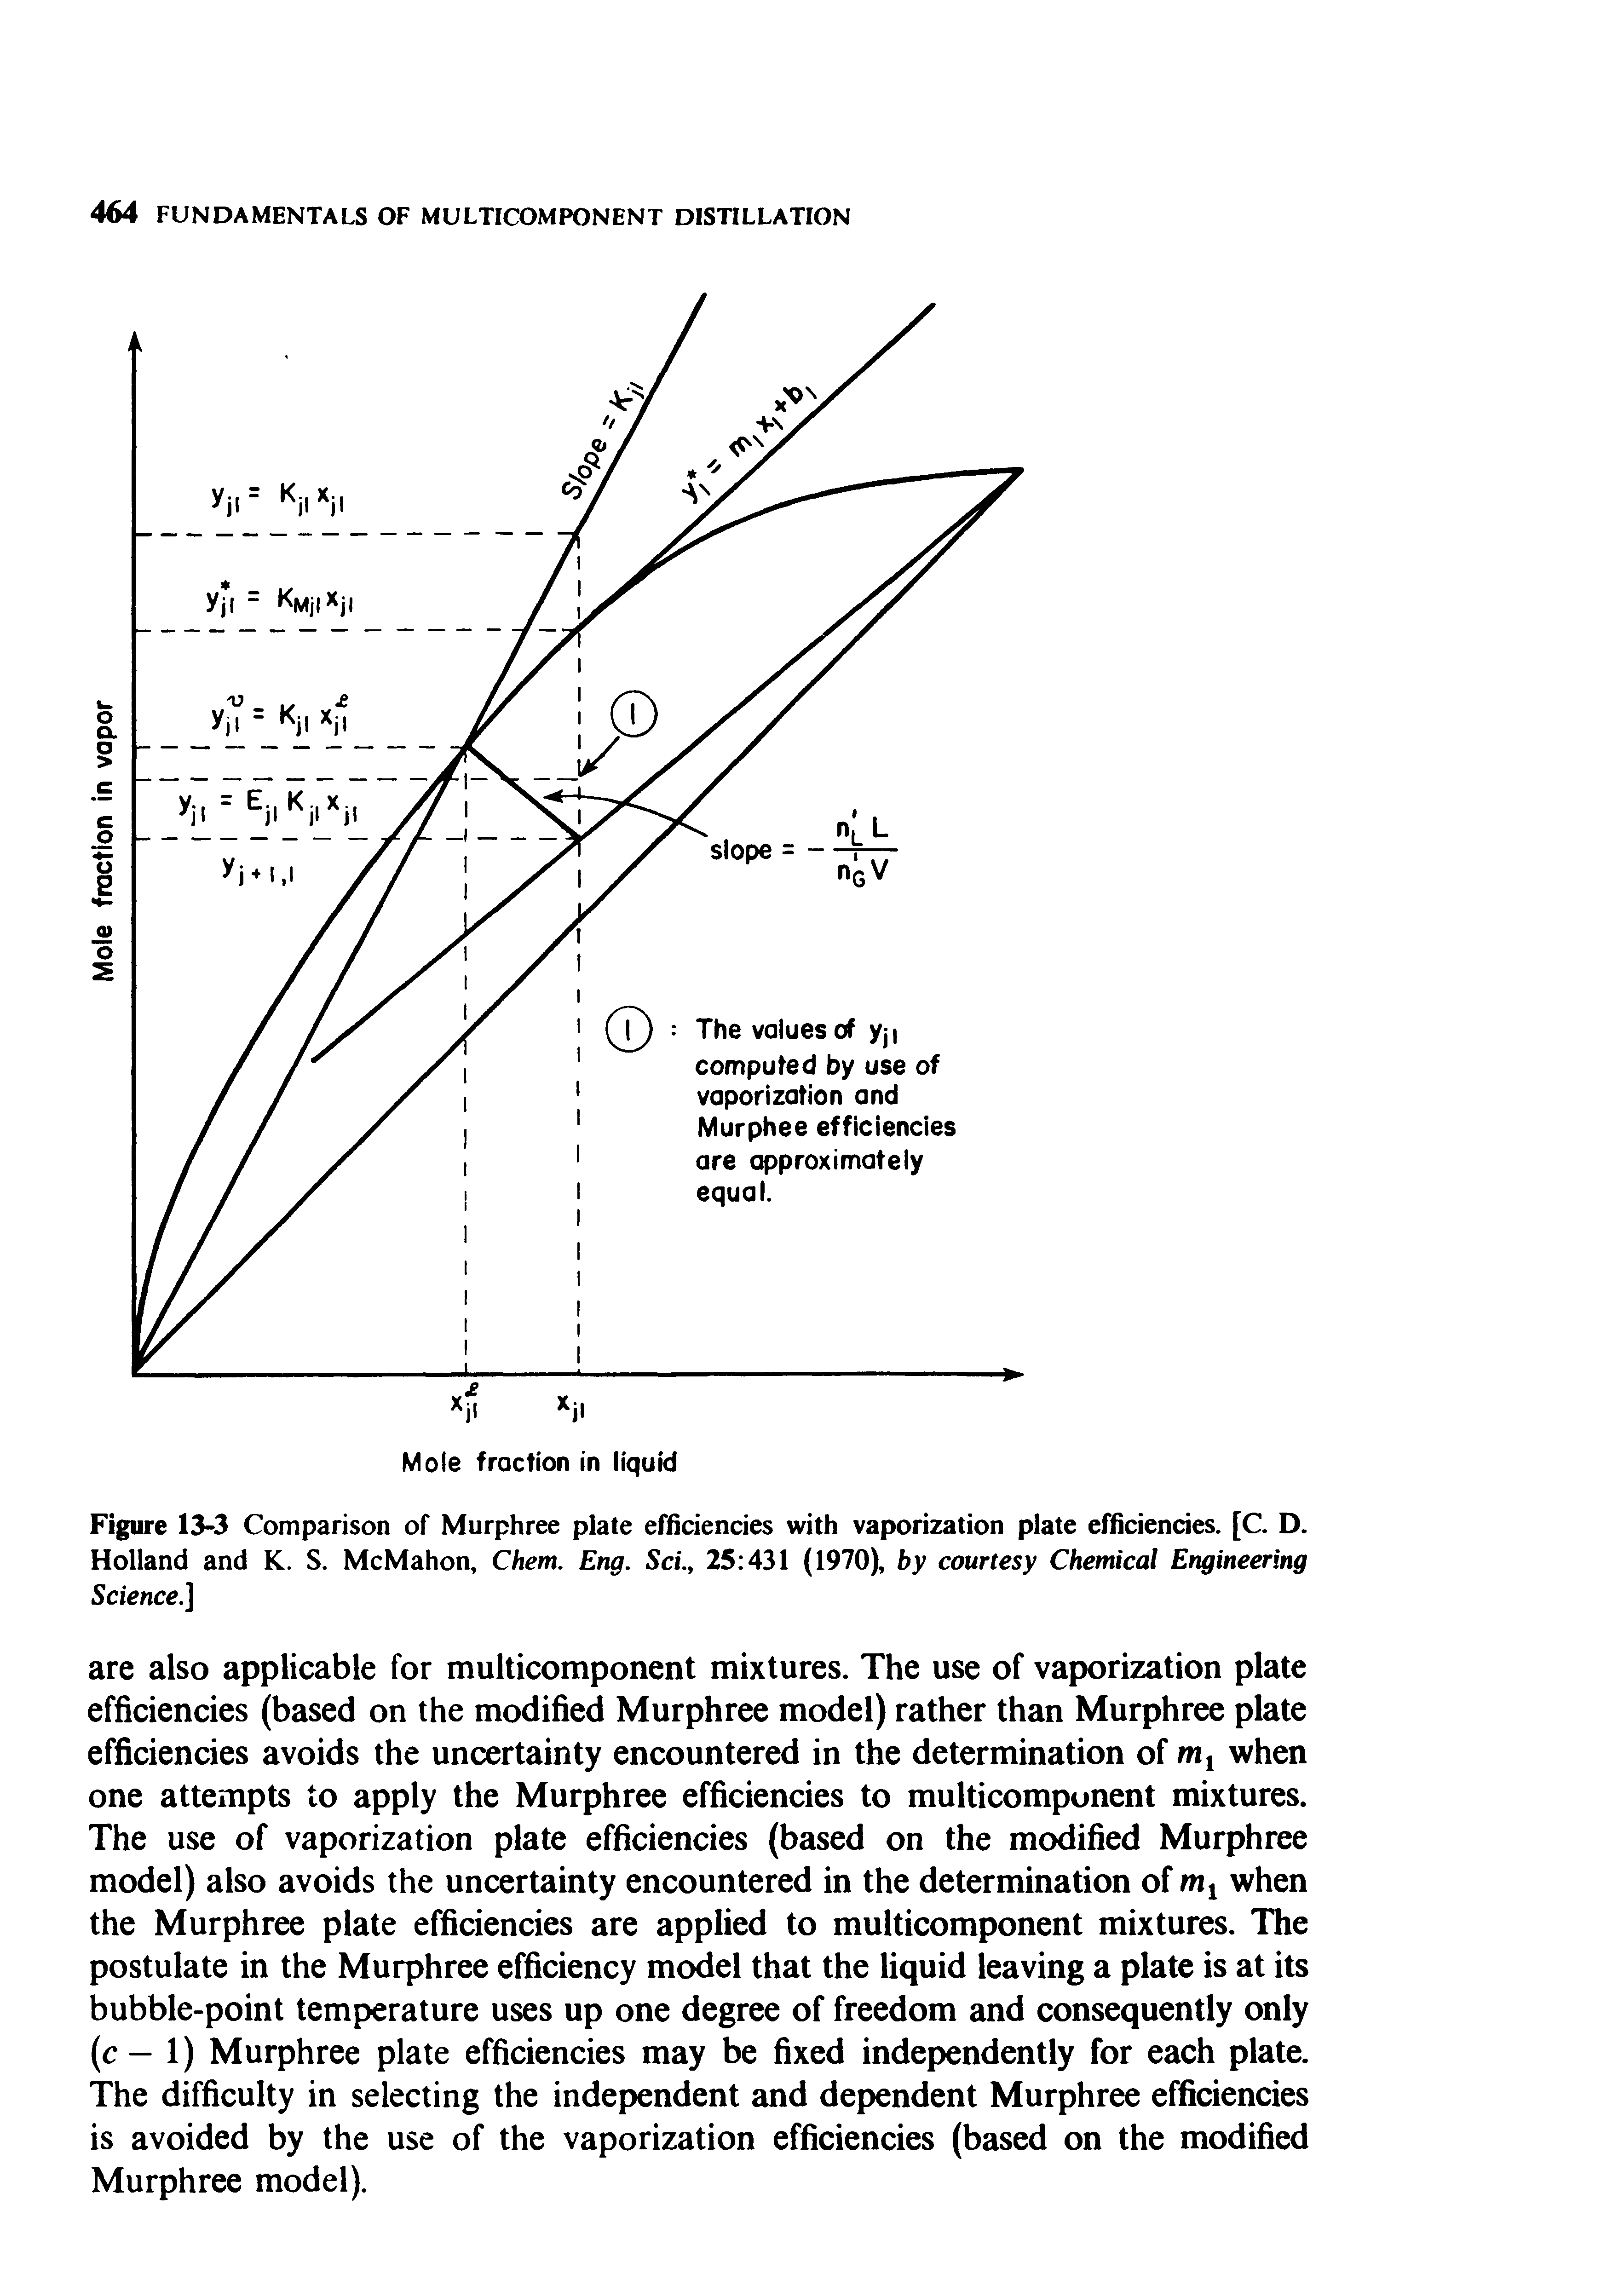 Figure 13-3 Comparison of Murphree plate efficiencies with vaporization plate efficiencies. [C. D. Holland and K. S. McMahon, Chem. Eng. Sci., 25 431 (1970), by courtesy Chemical Engineering Science.]...